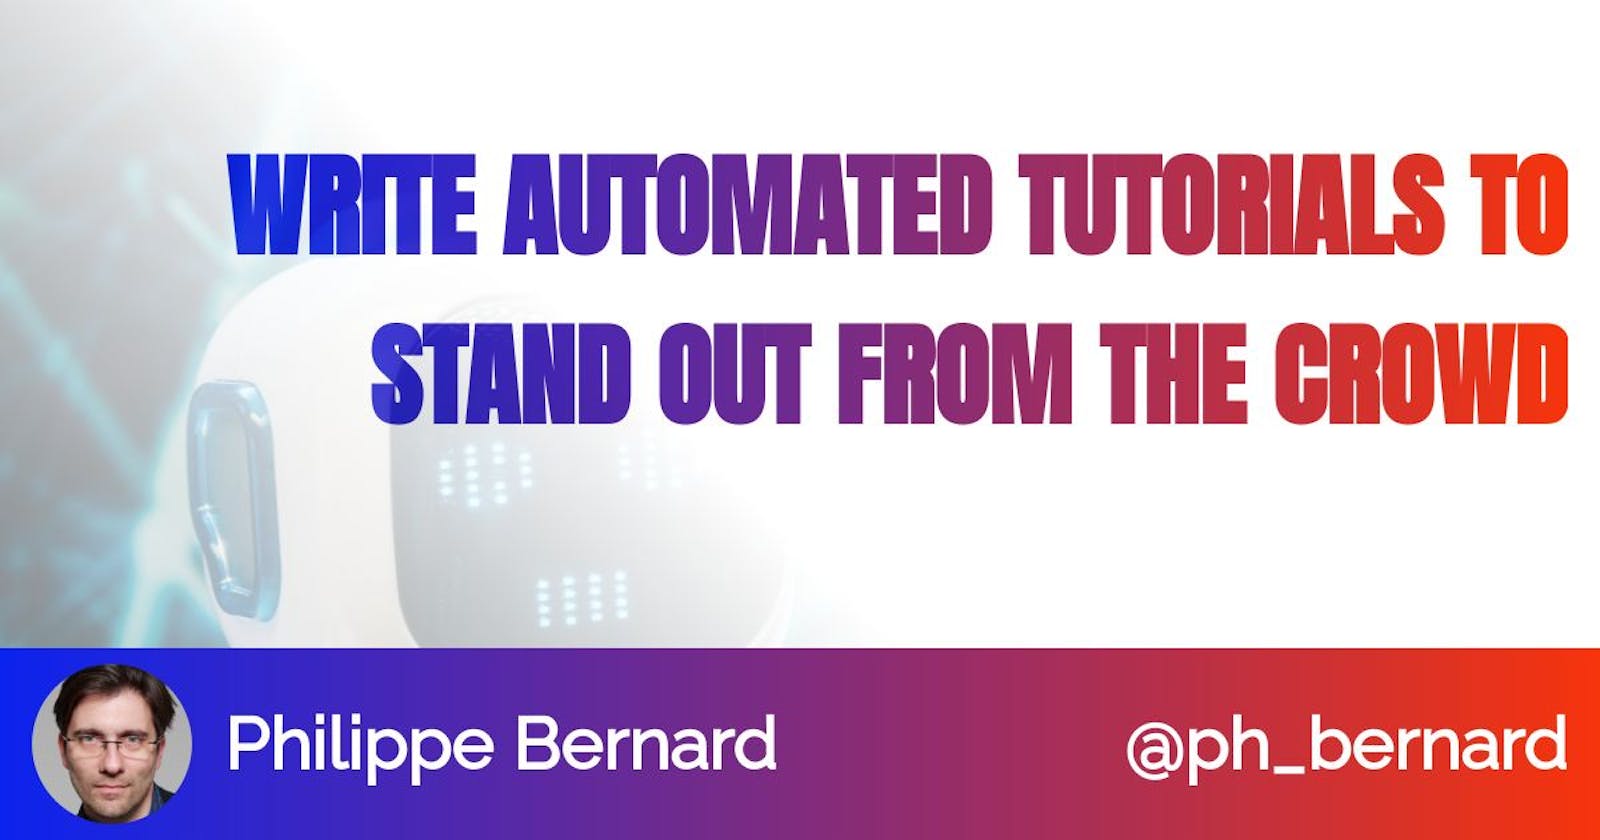 Write automated tutorials to stand out from the crowd